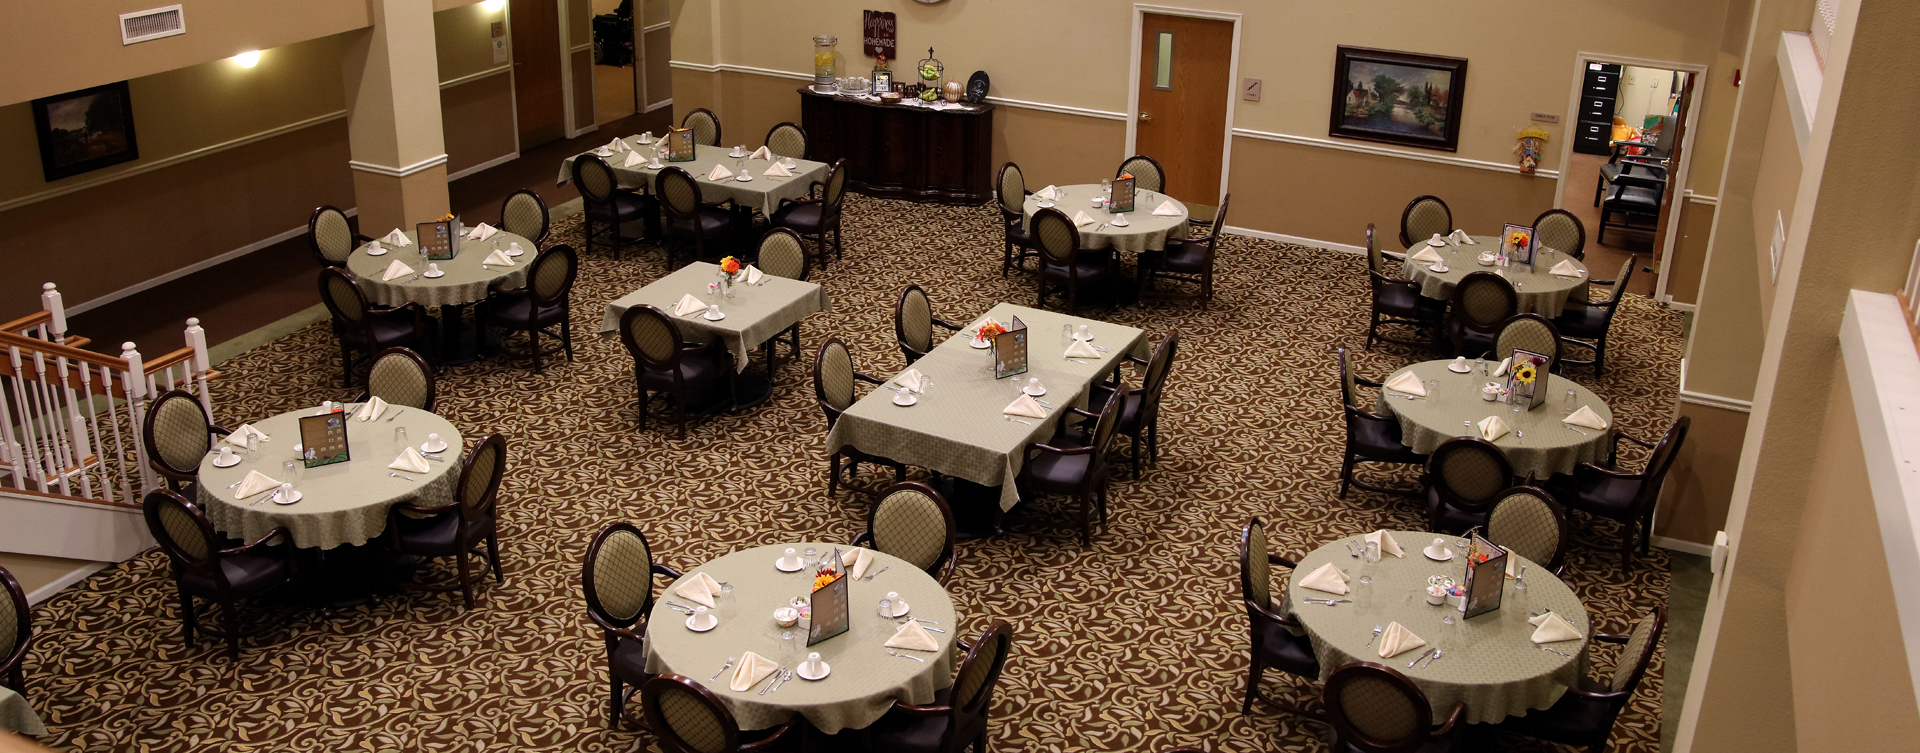 Enjoy restaurant -style meals served three times a day in our dining room at Bickford of Rockford